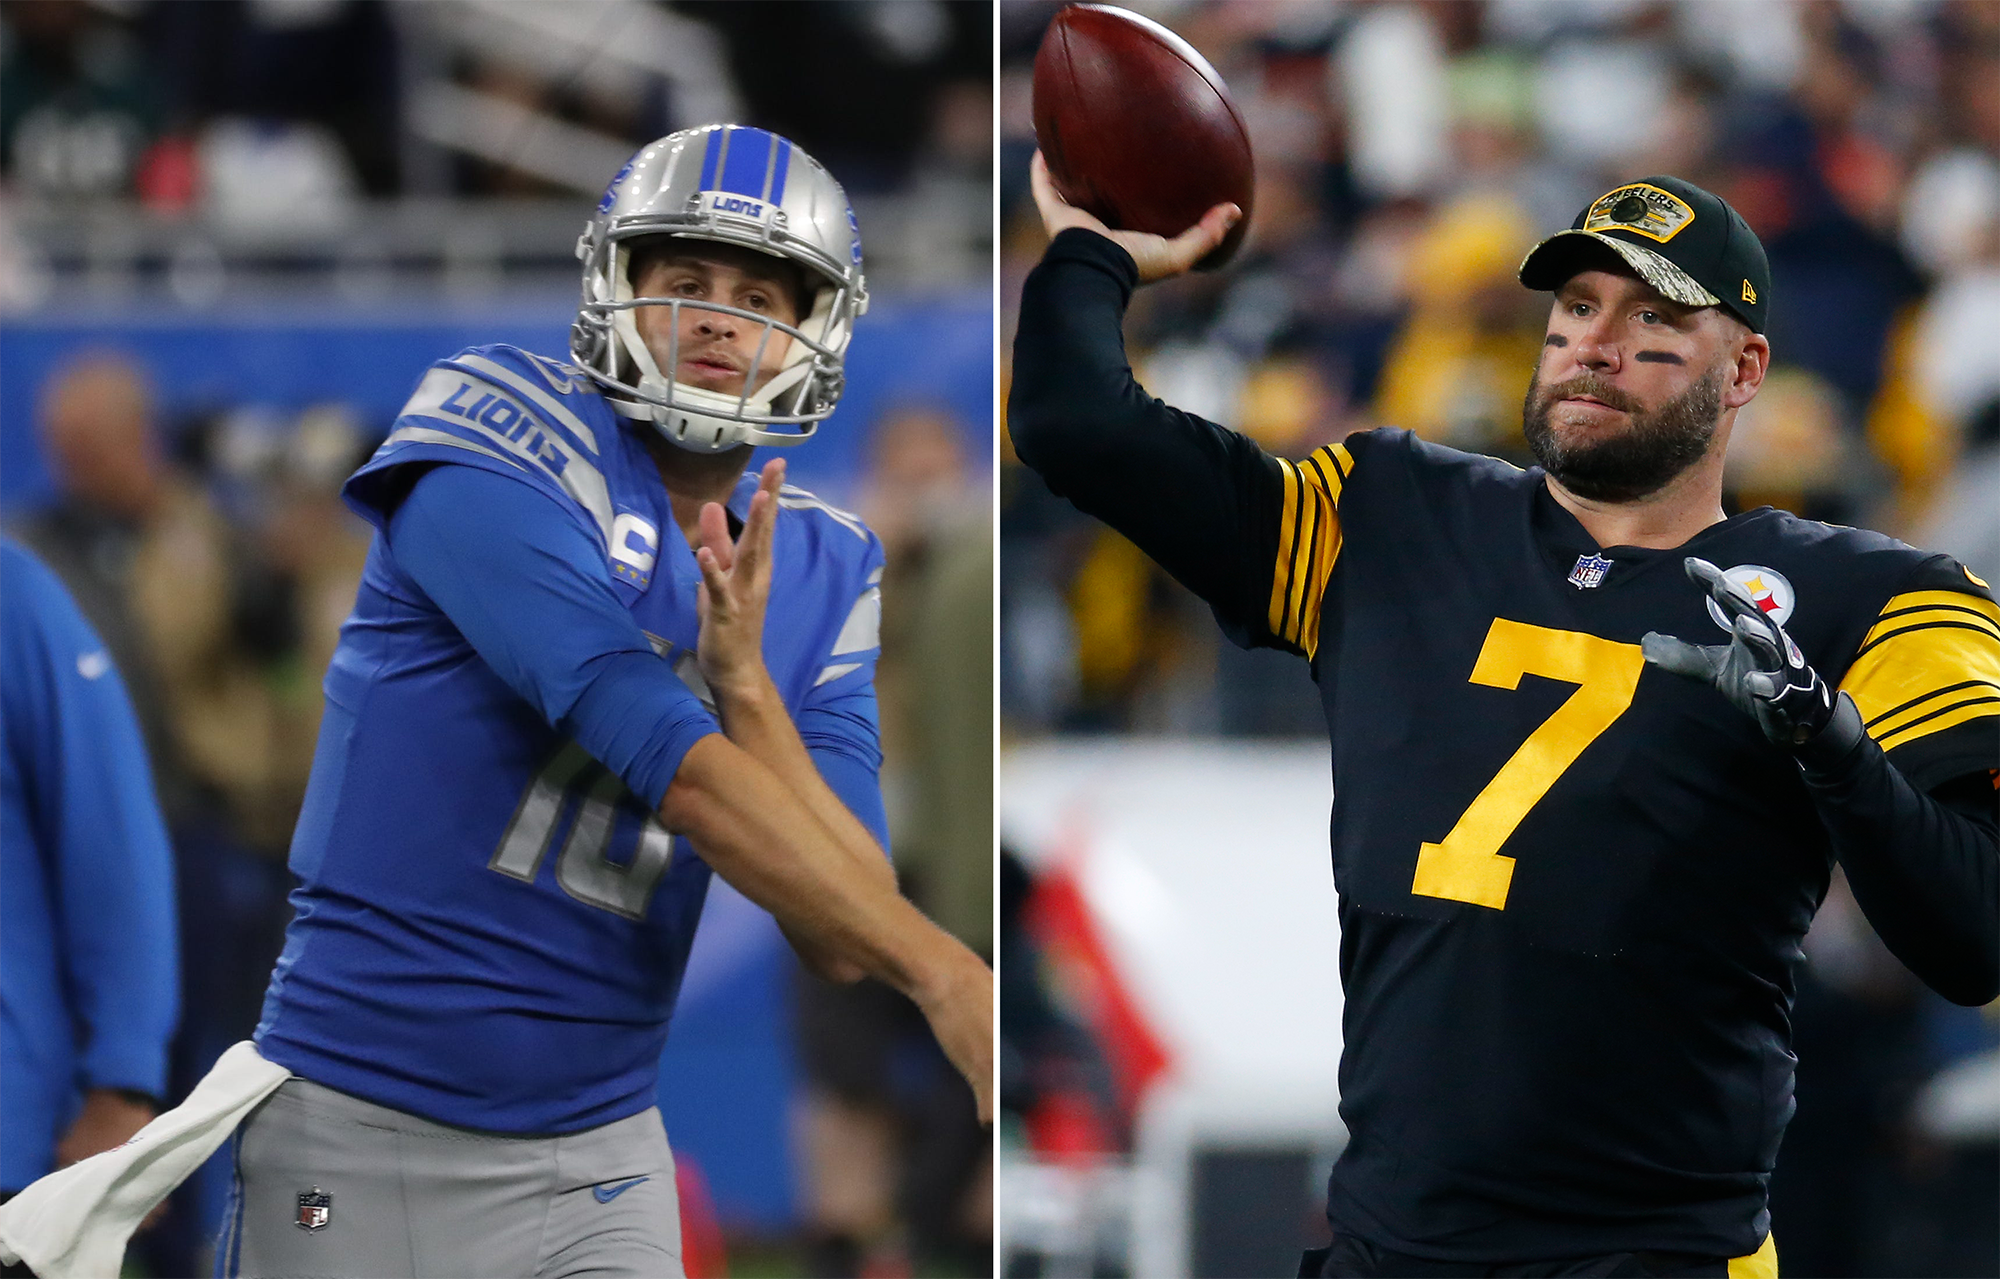 Lions vs. Steelers prediction: Detroit can hang with Pittsburgh’s dreadful offense